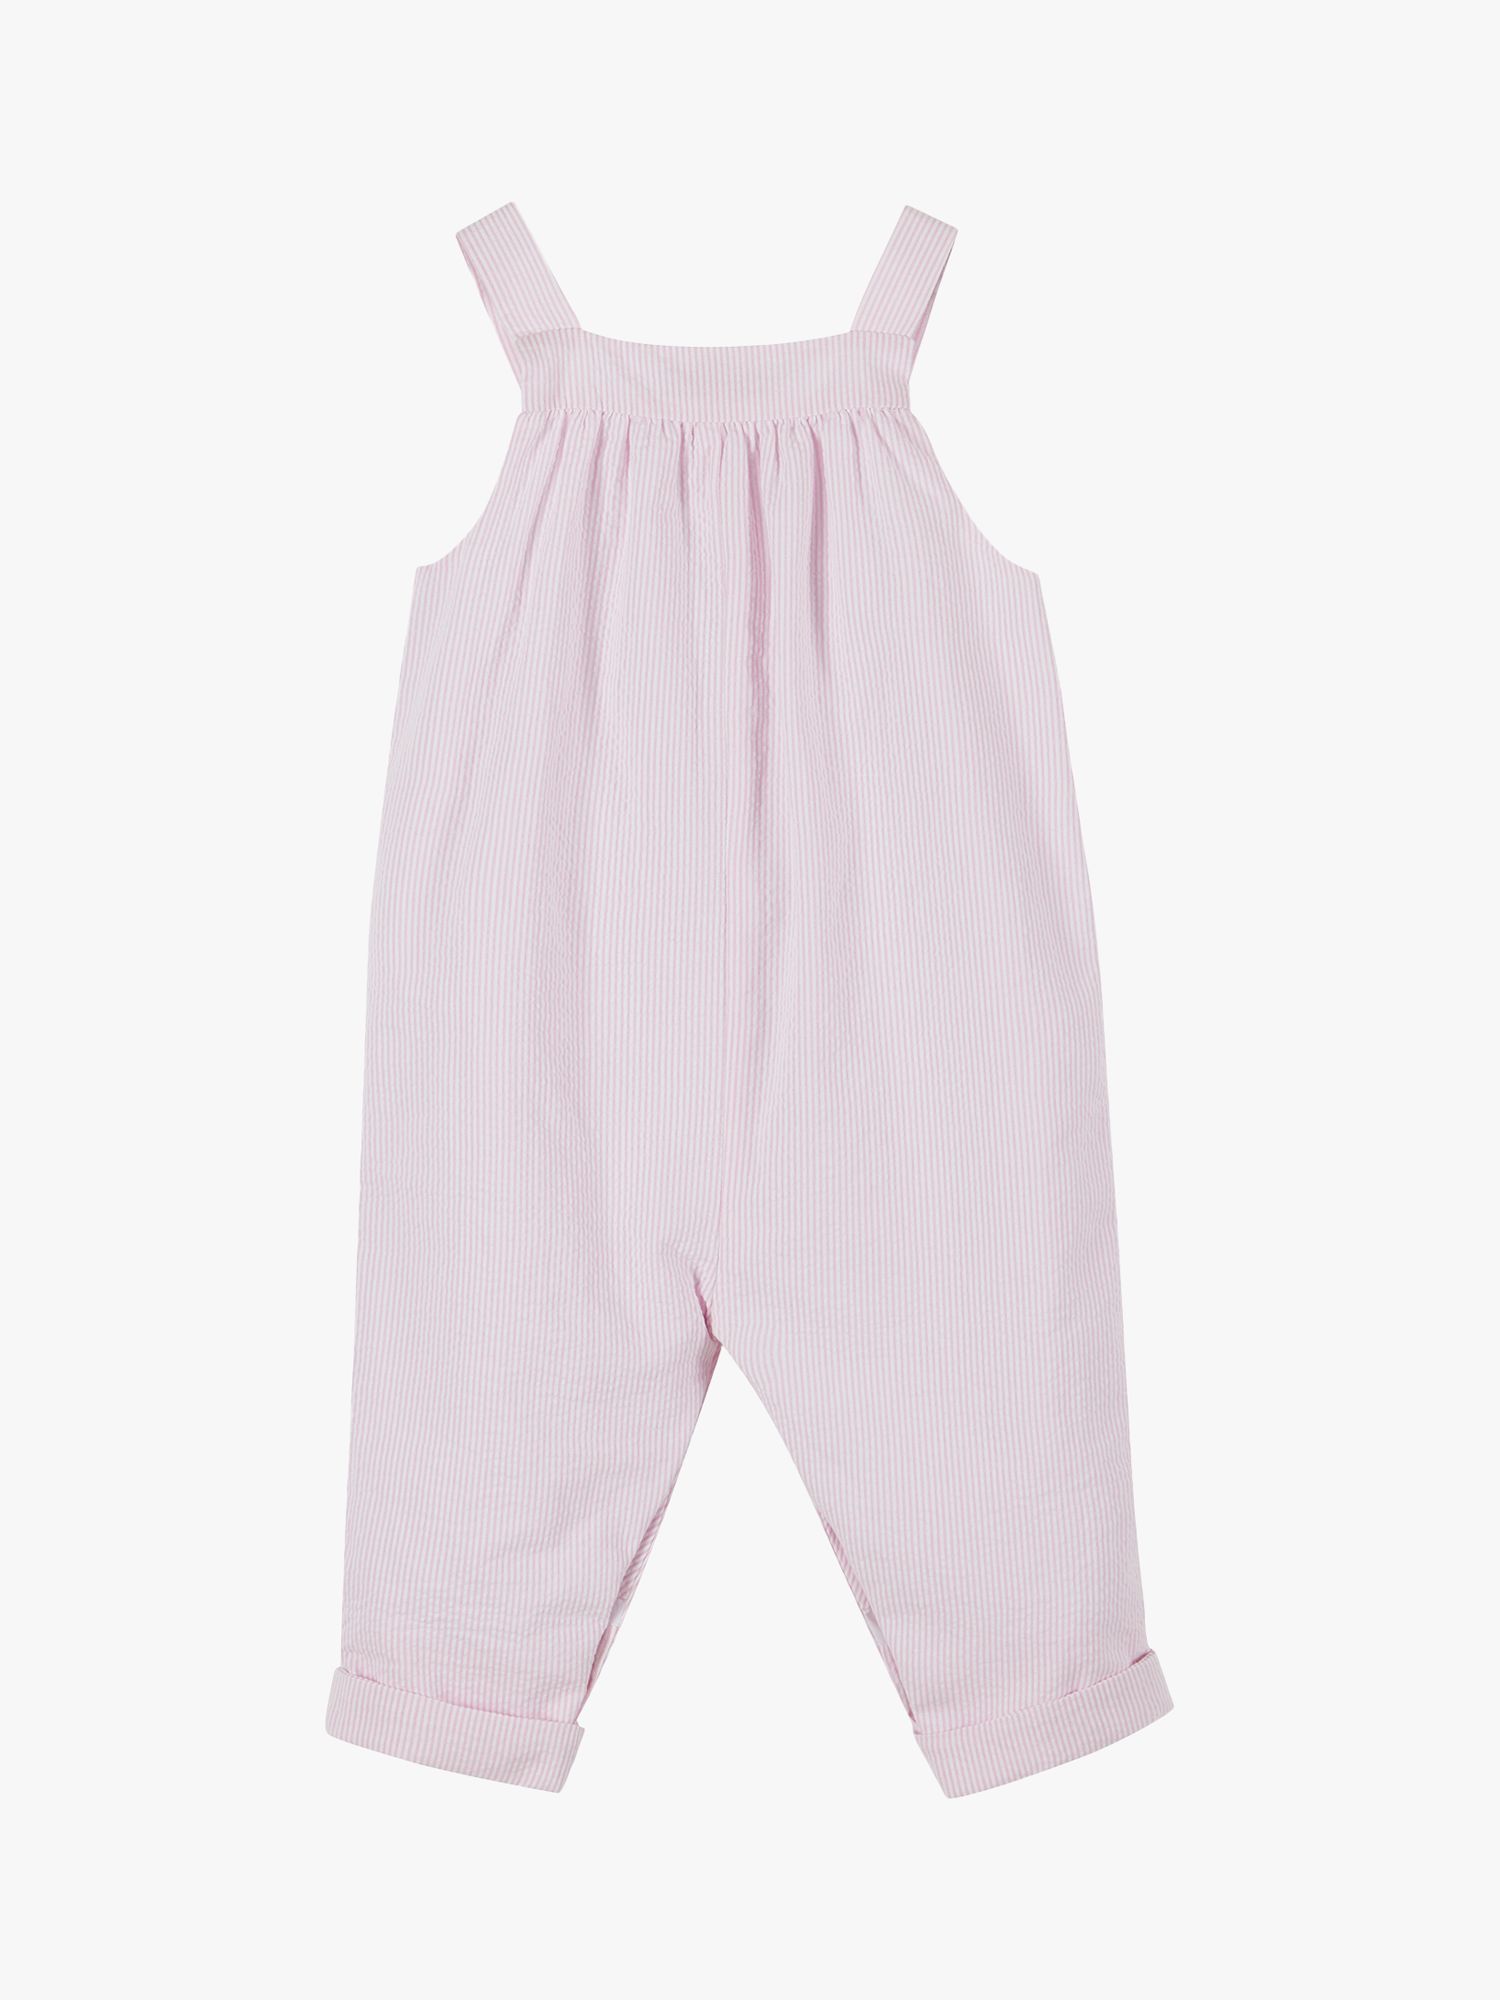 Trotters Baby Jemima Striped Dungarees, Pink, 3-6 months